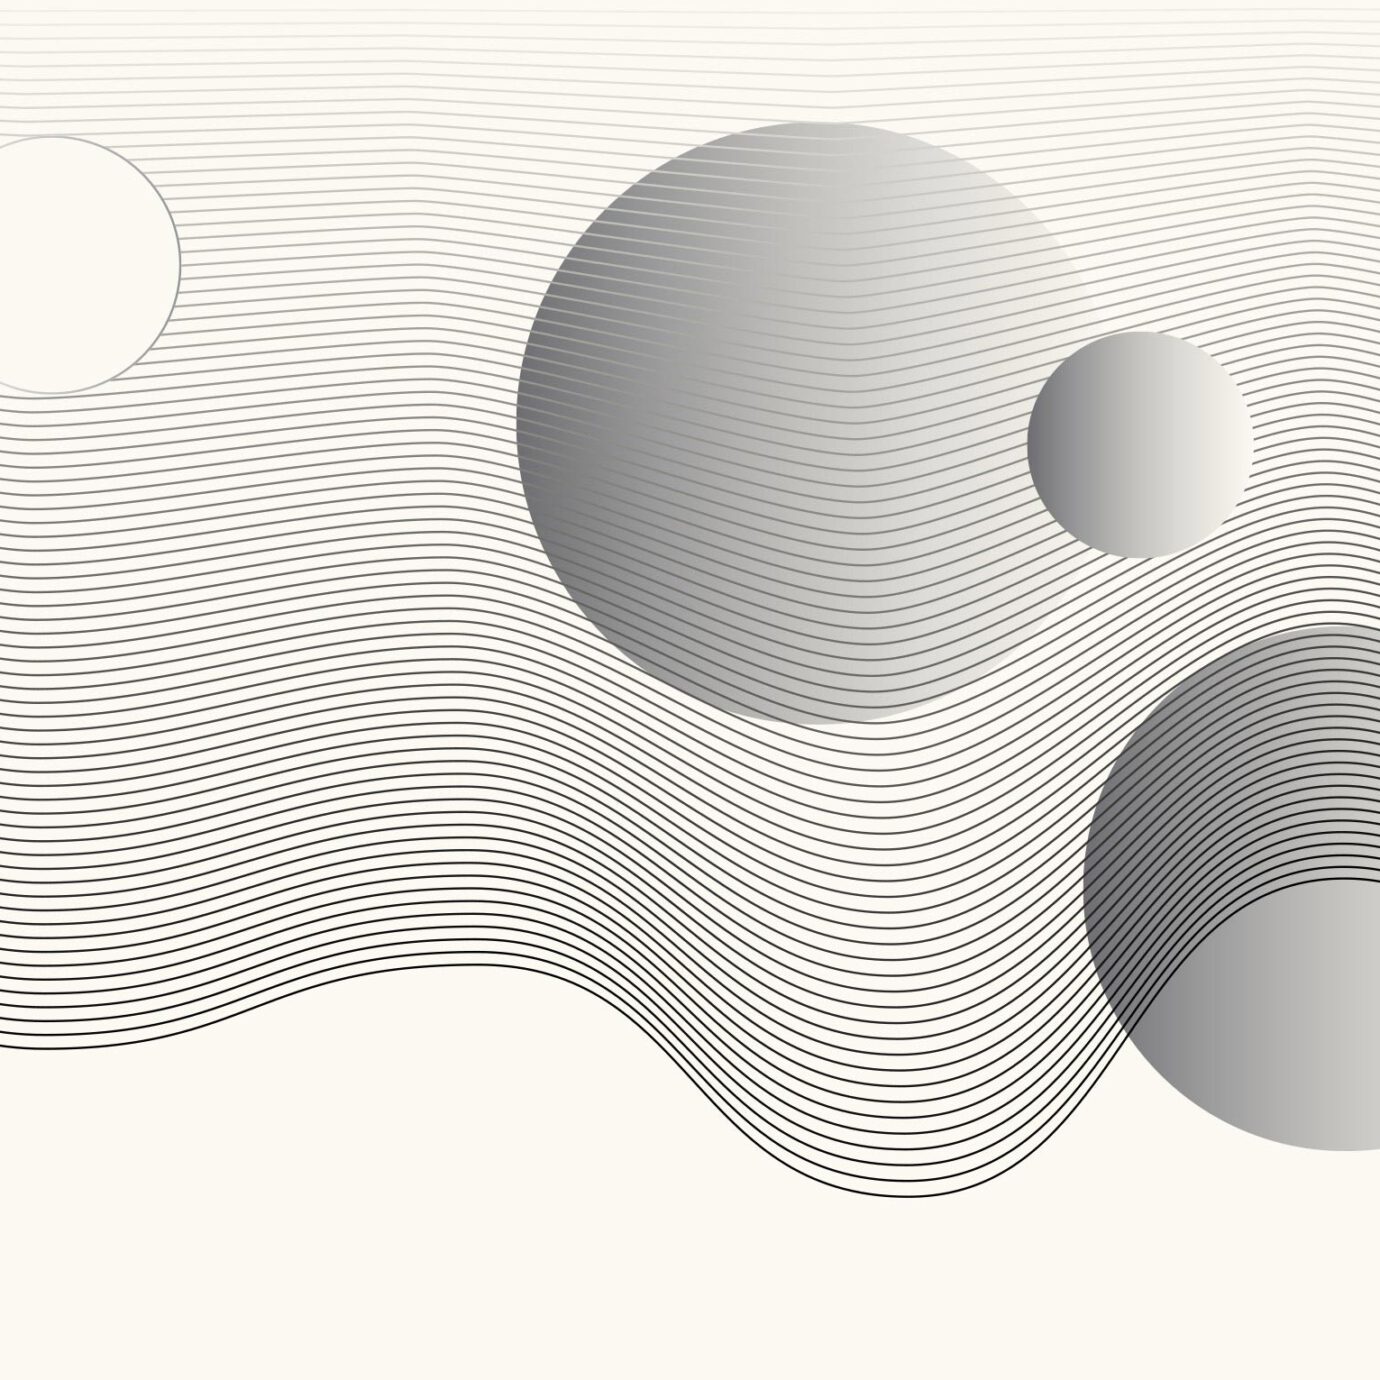 grayscale dimensional spheres floating amongst a thin line wave pattern on cream background